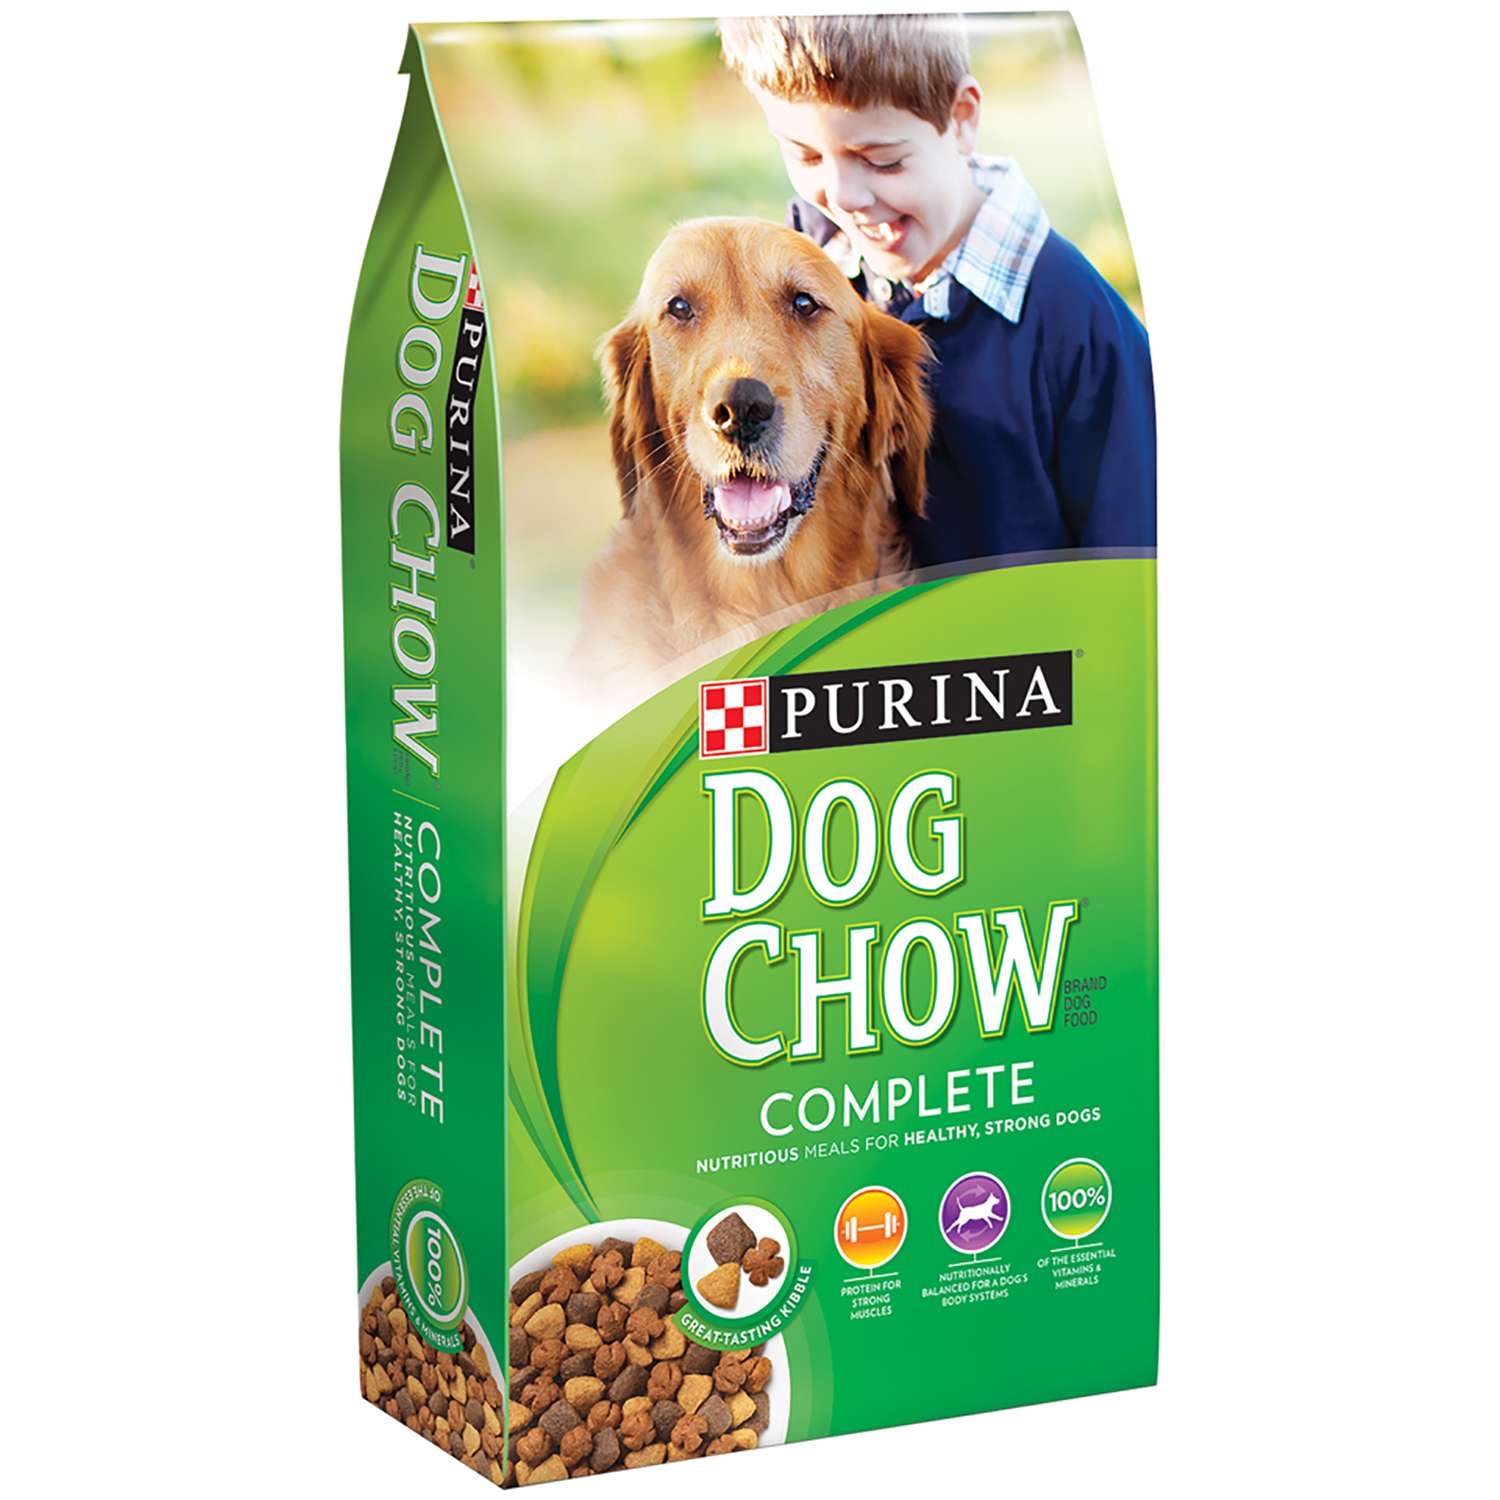 why is purina bad for dogs